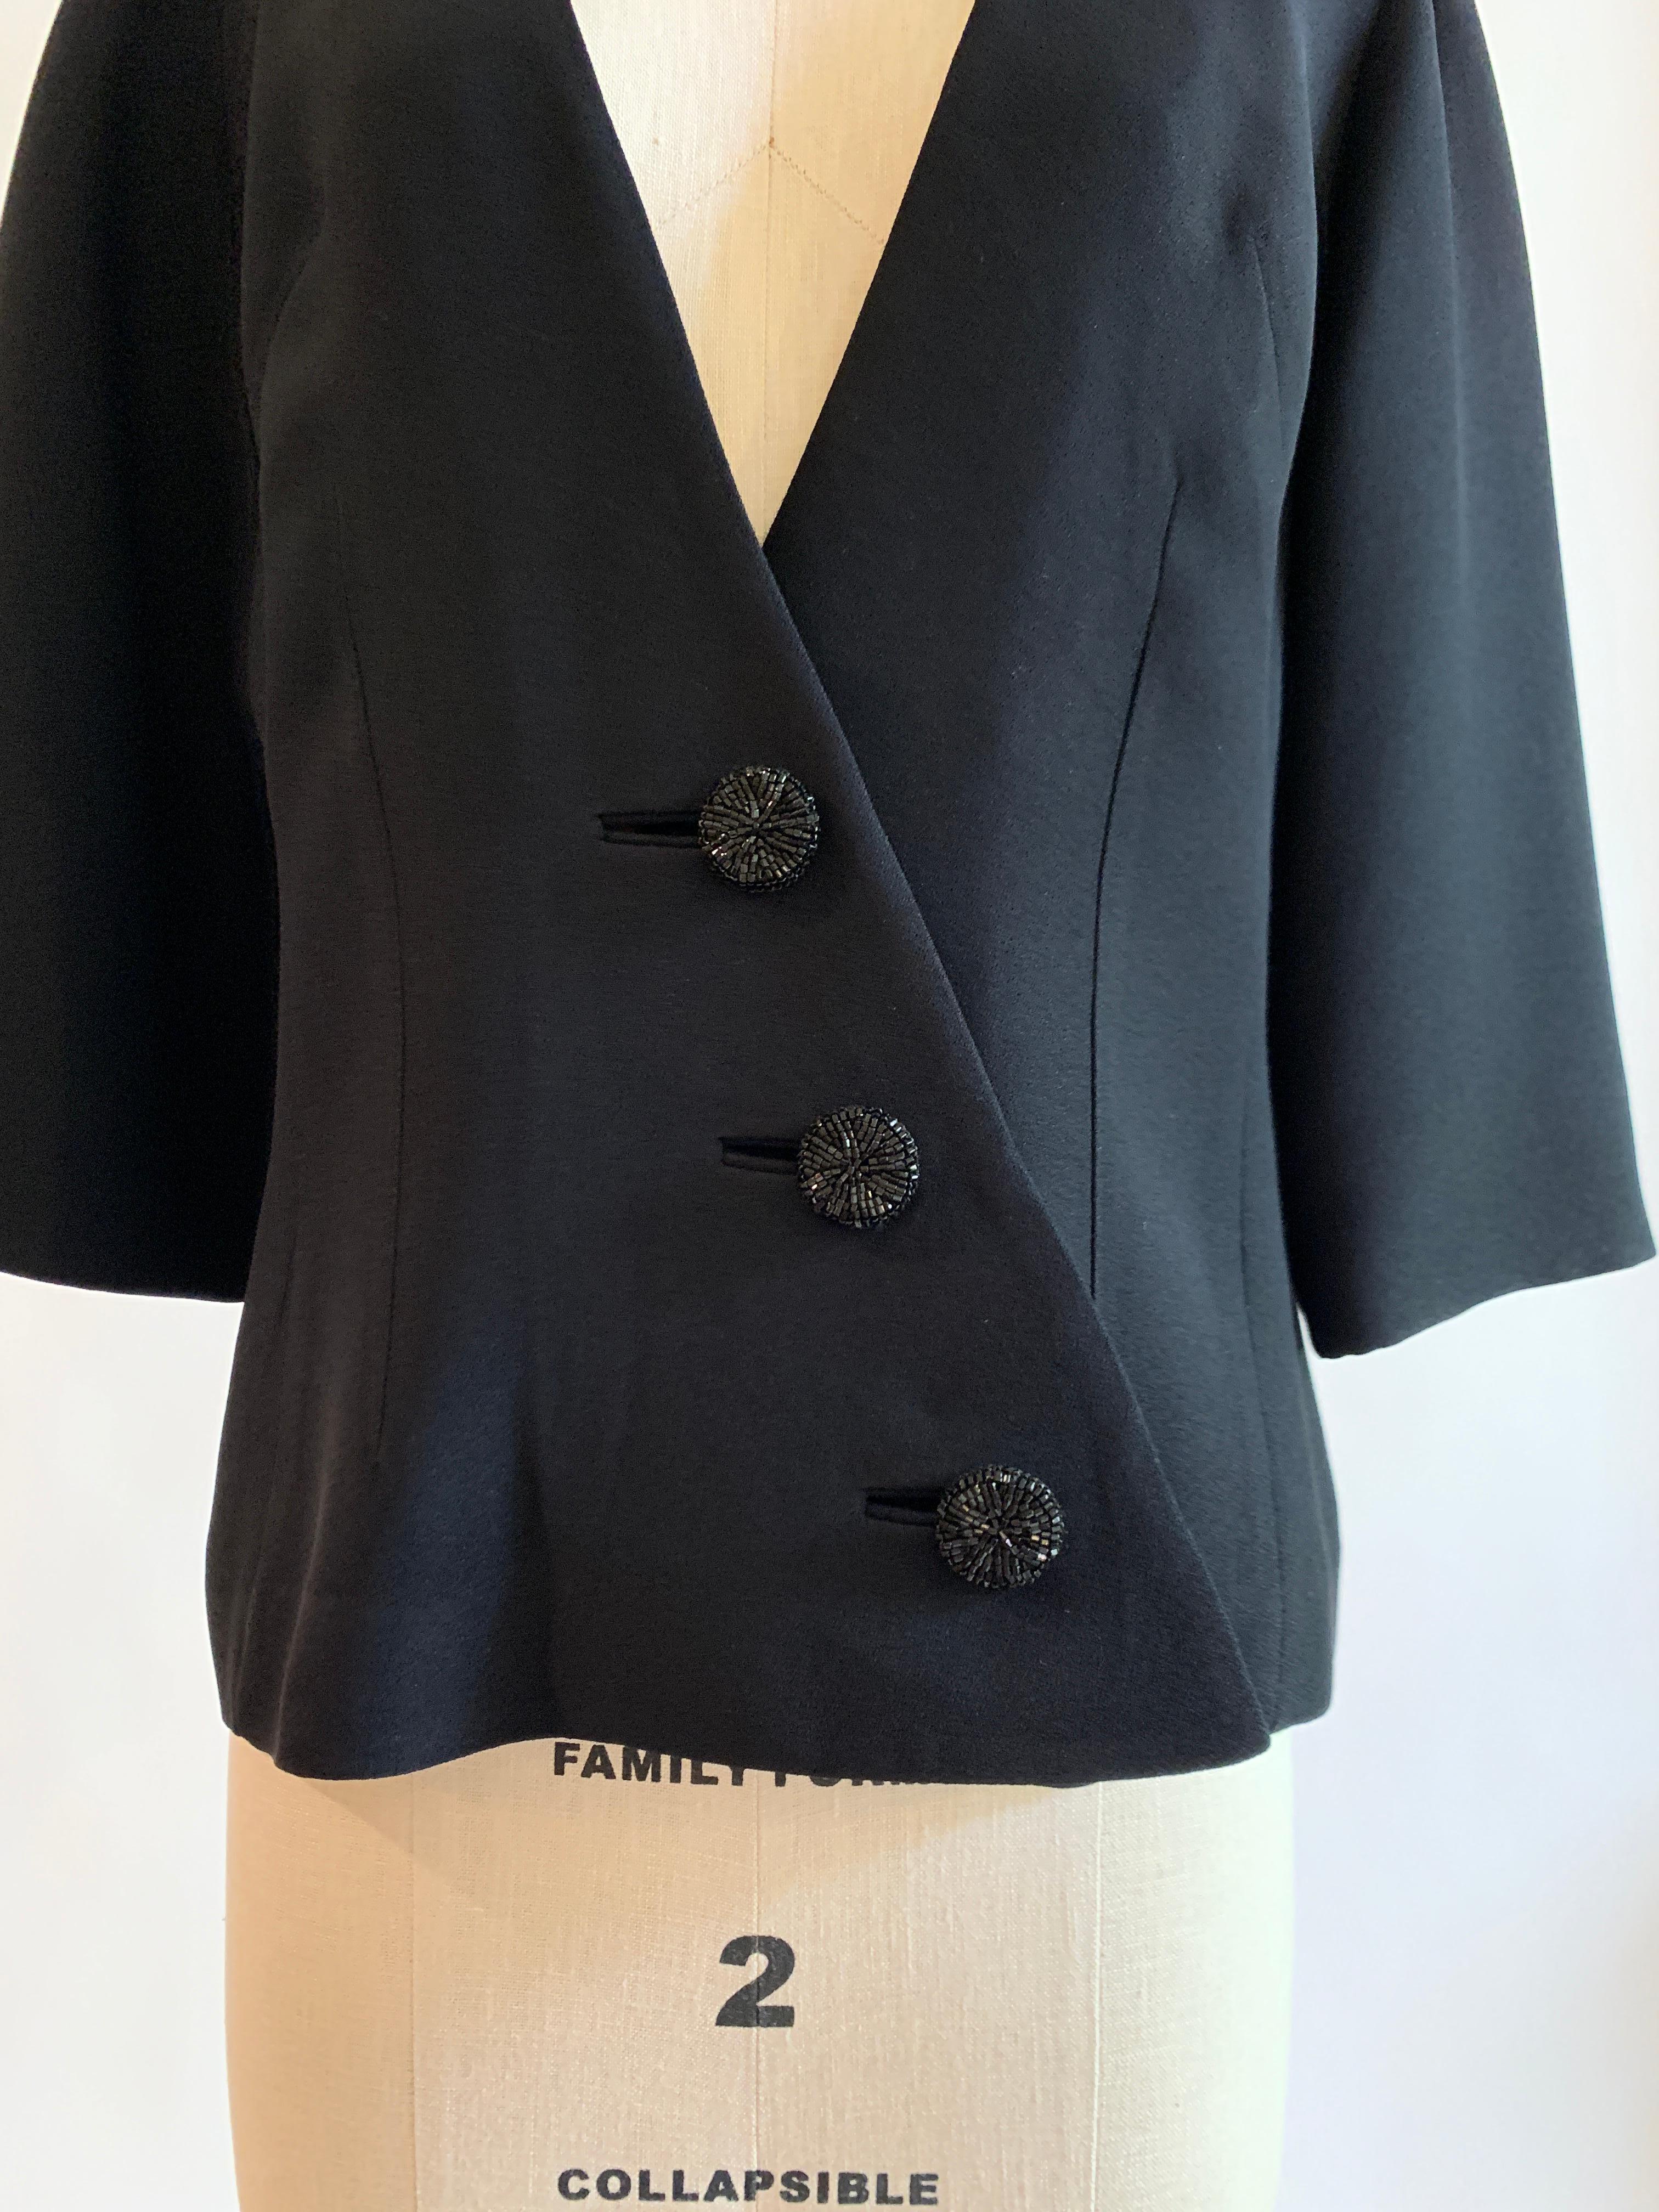 1960s ClaraLura Original Black Asymmetrical Blazer Jacket with Beaded Buttons In Good Condition For Sale In San Francisco, CA